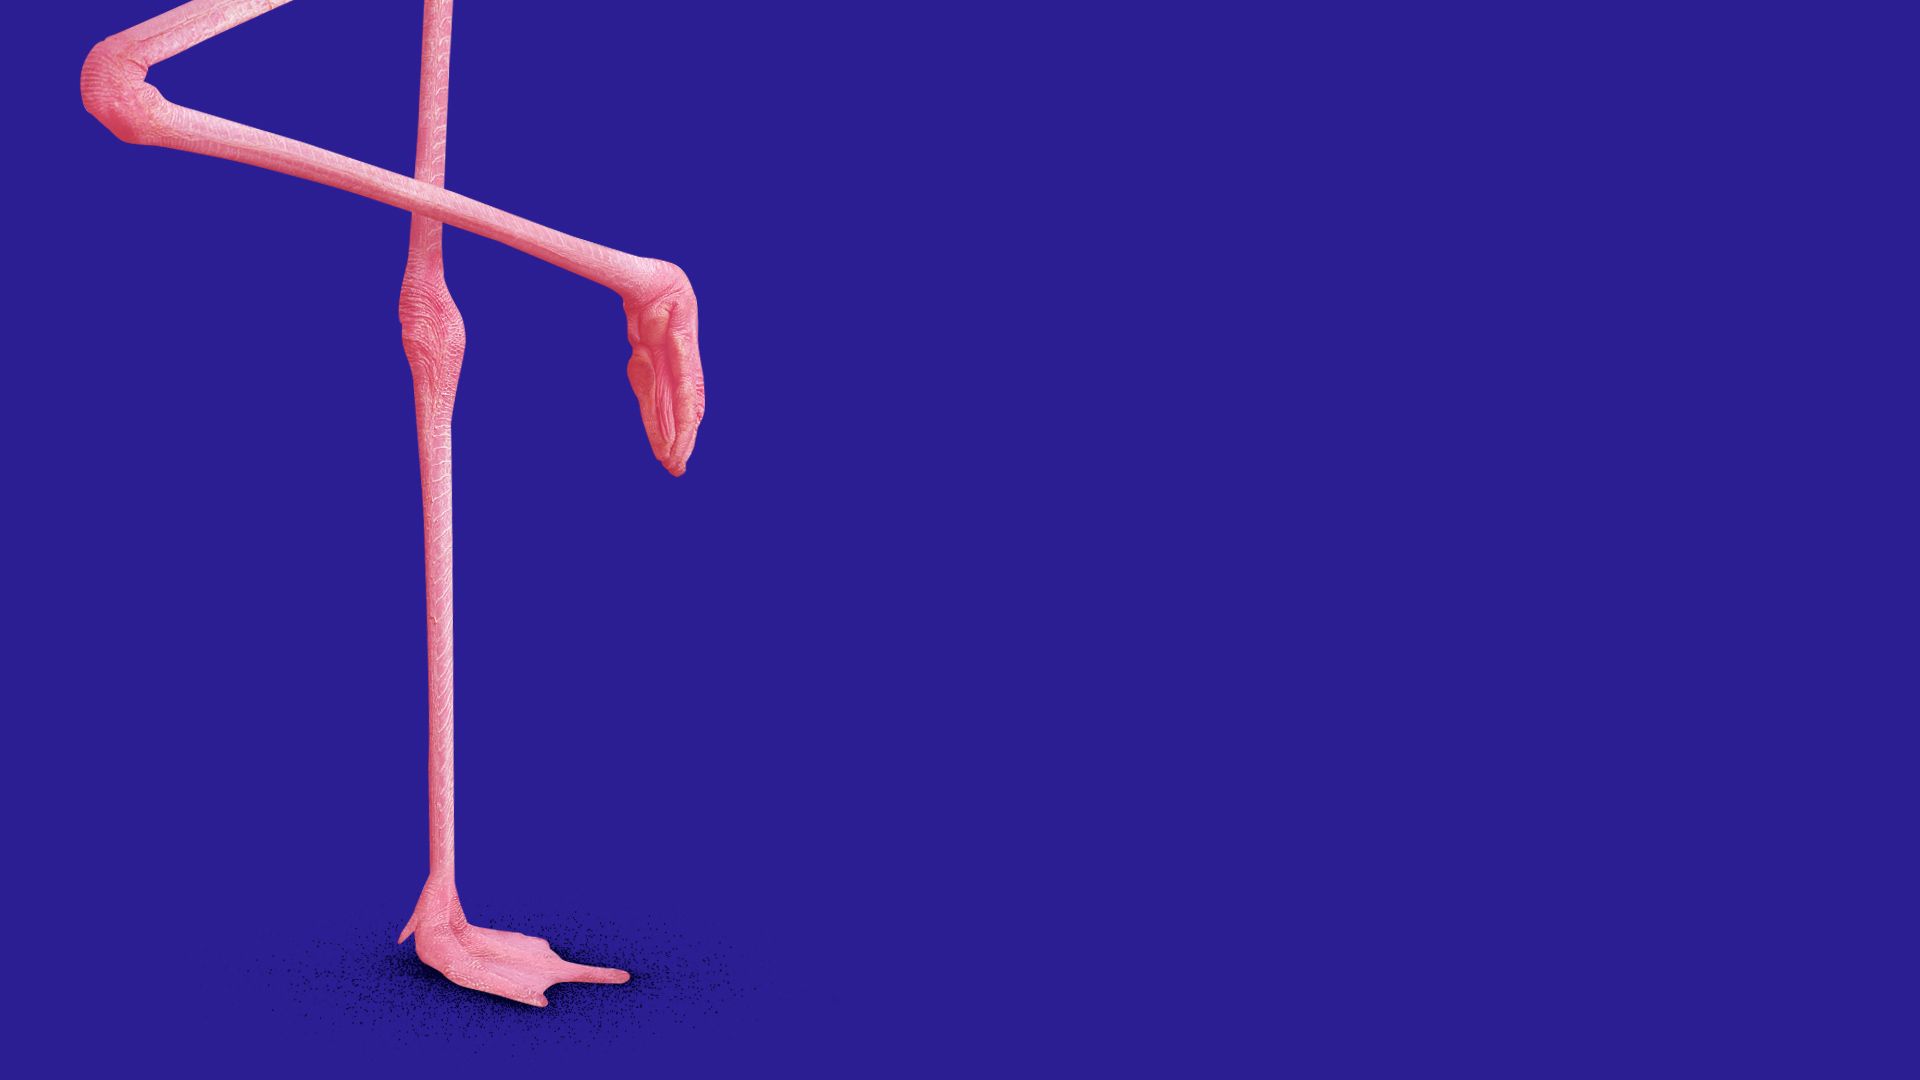 Illustration of a flamingo's legs in a one-legged pose. 